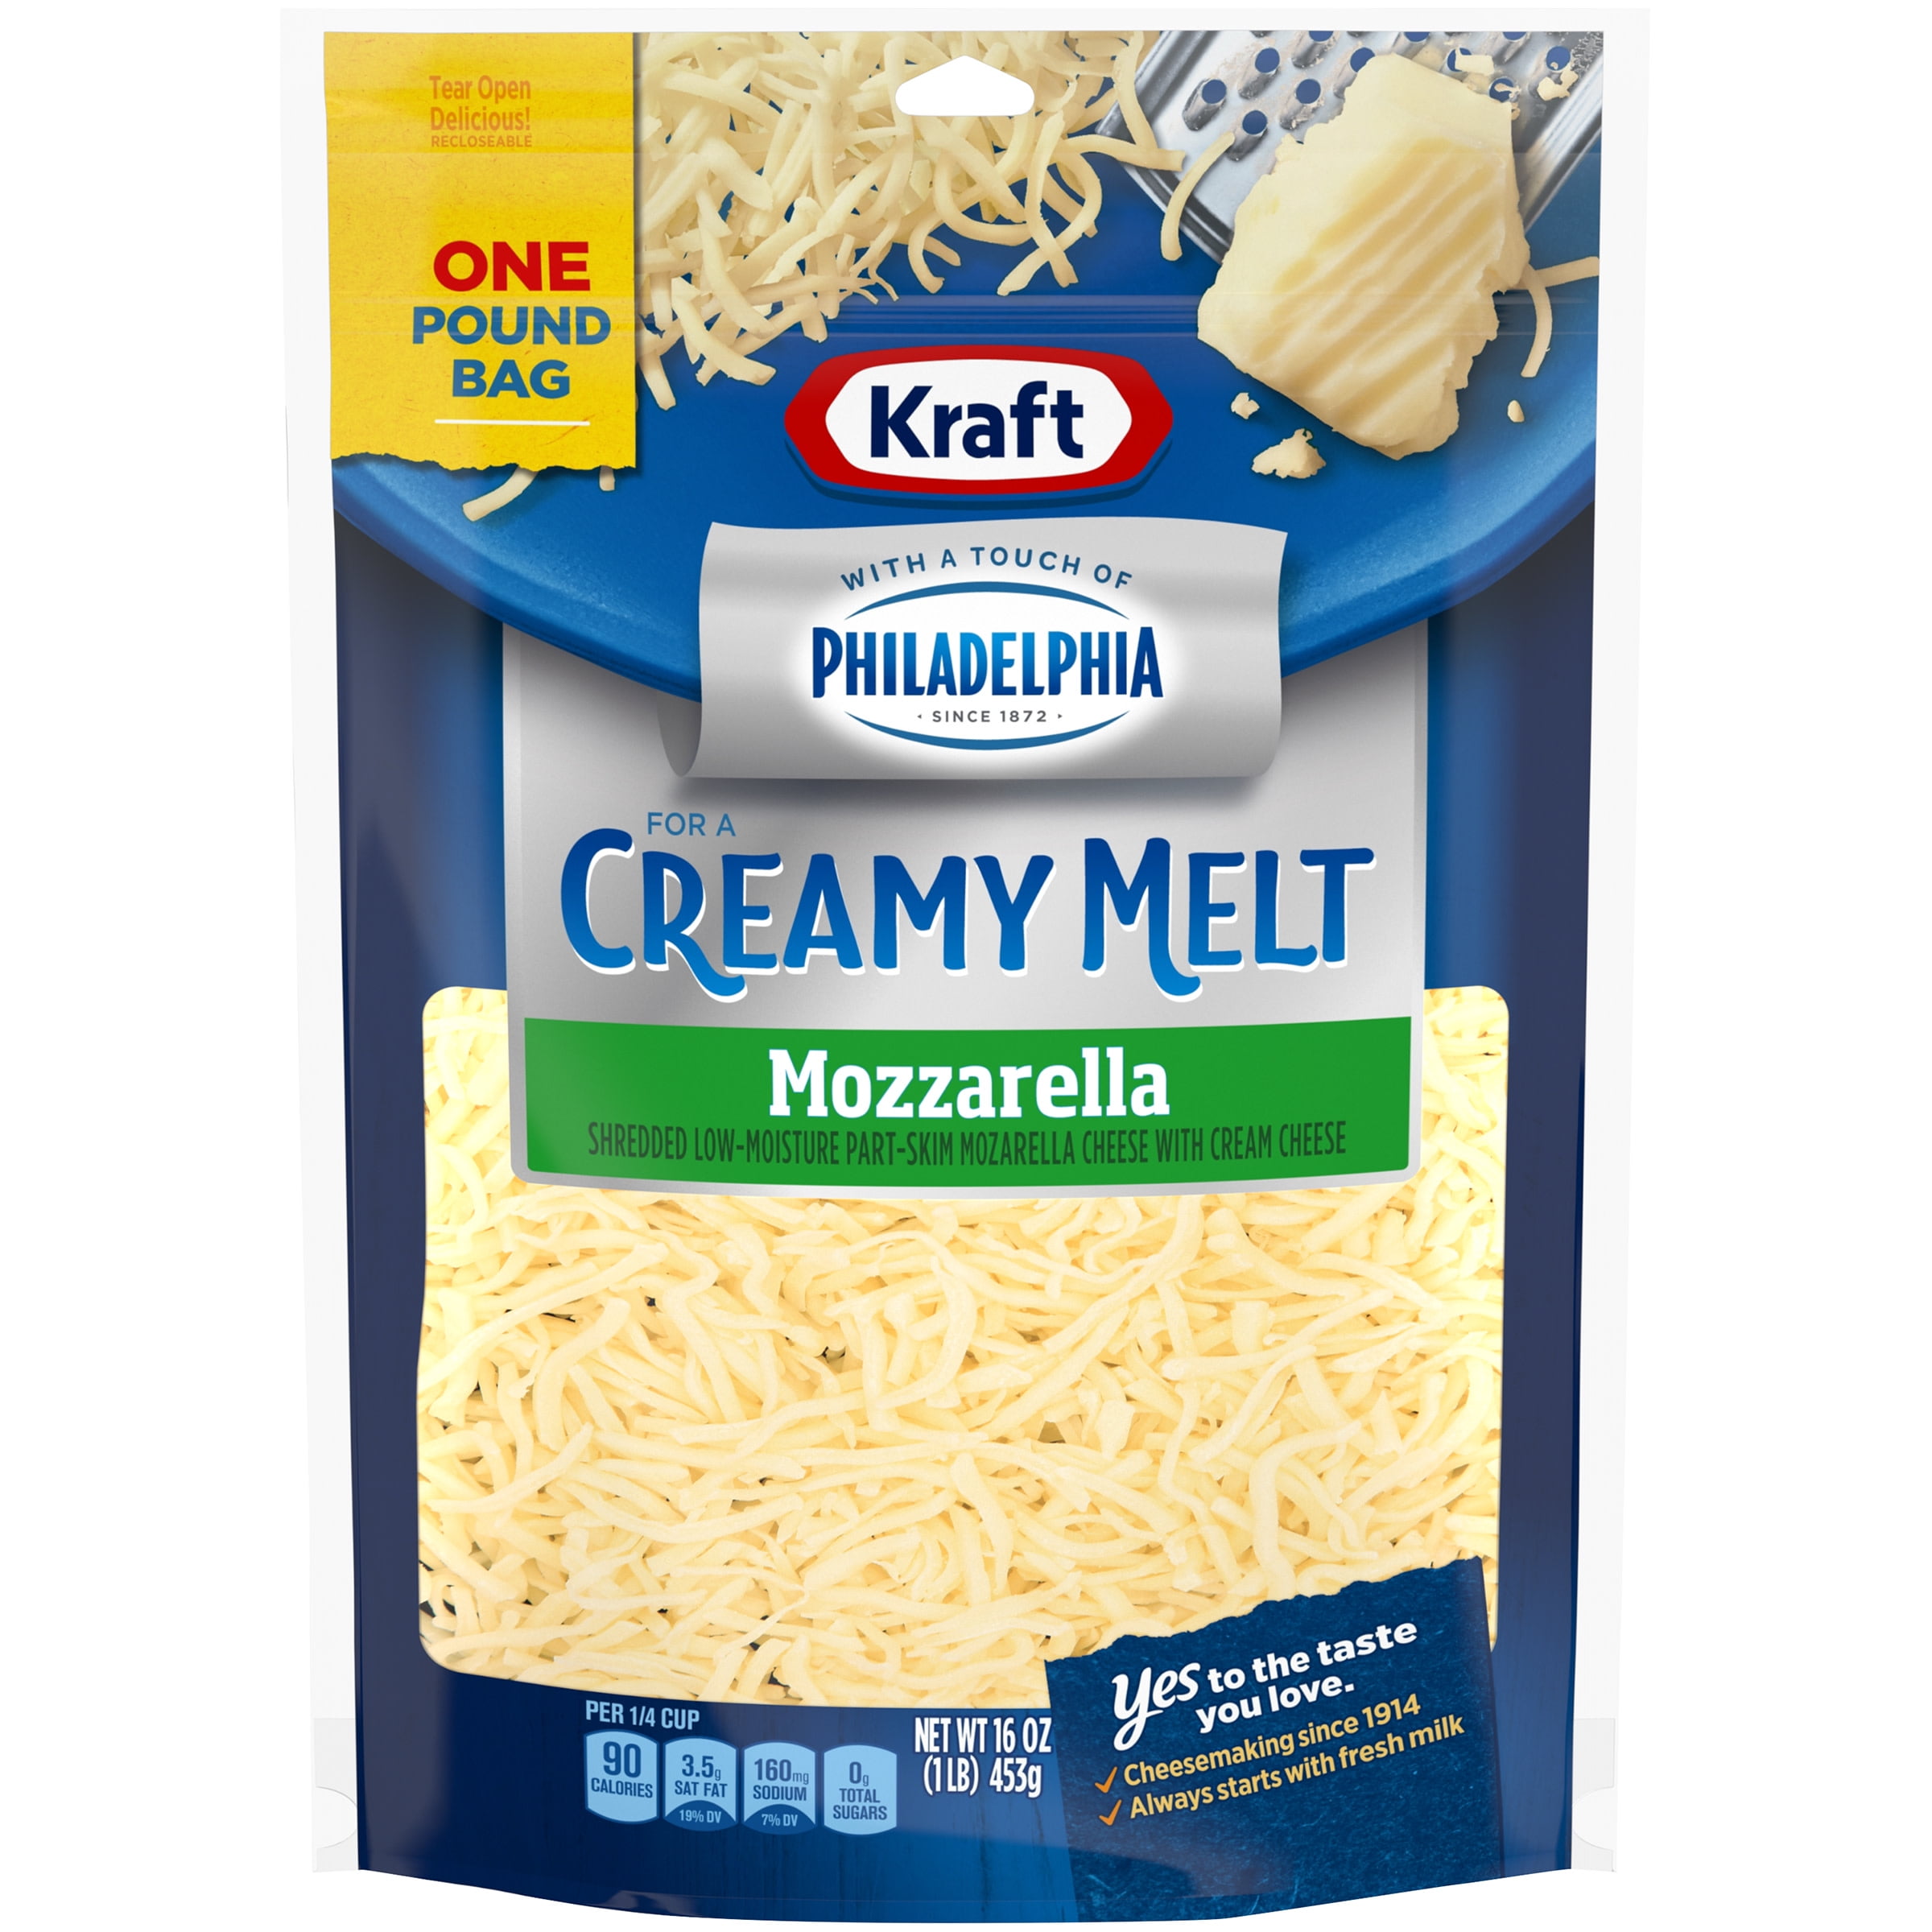 Kraft Mozzarella Shredded Cheese with a Touch of Philadelphia for a